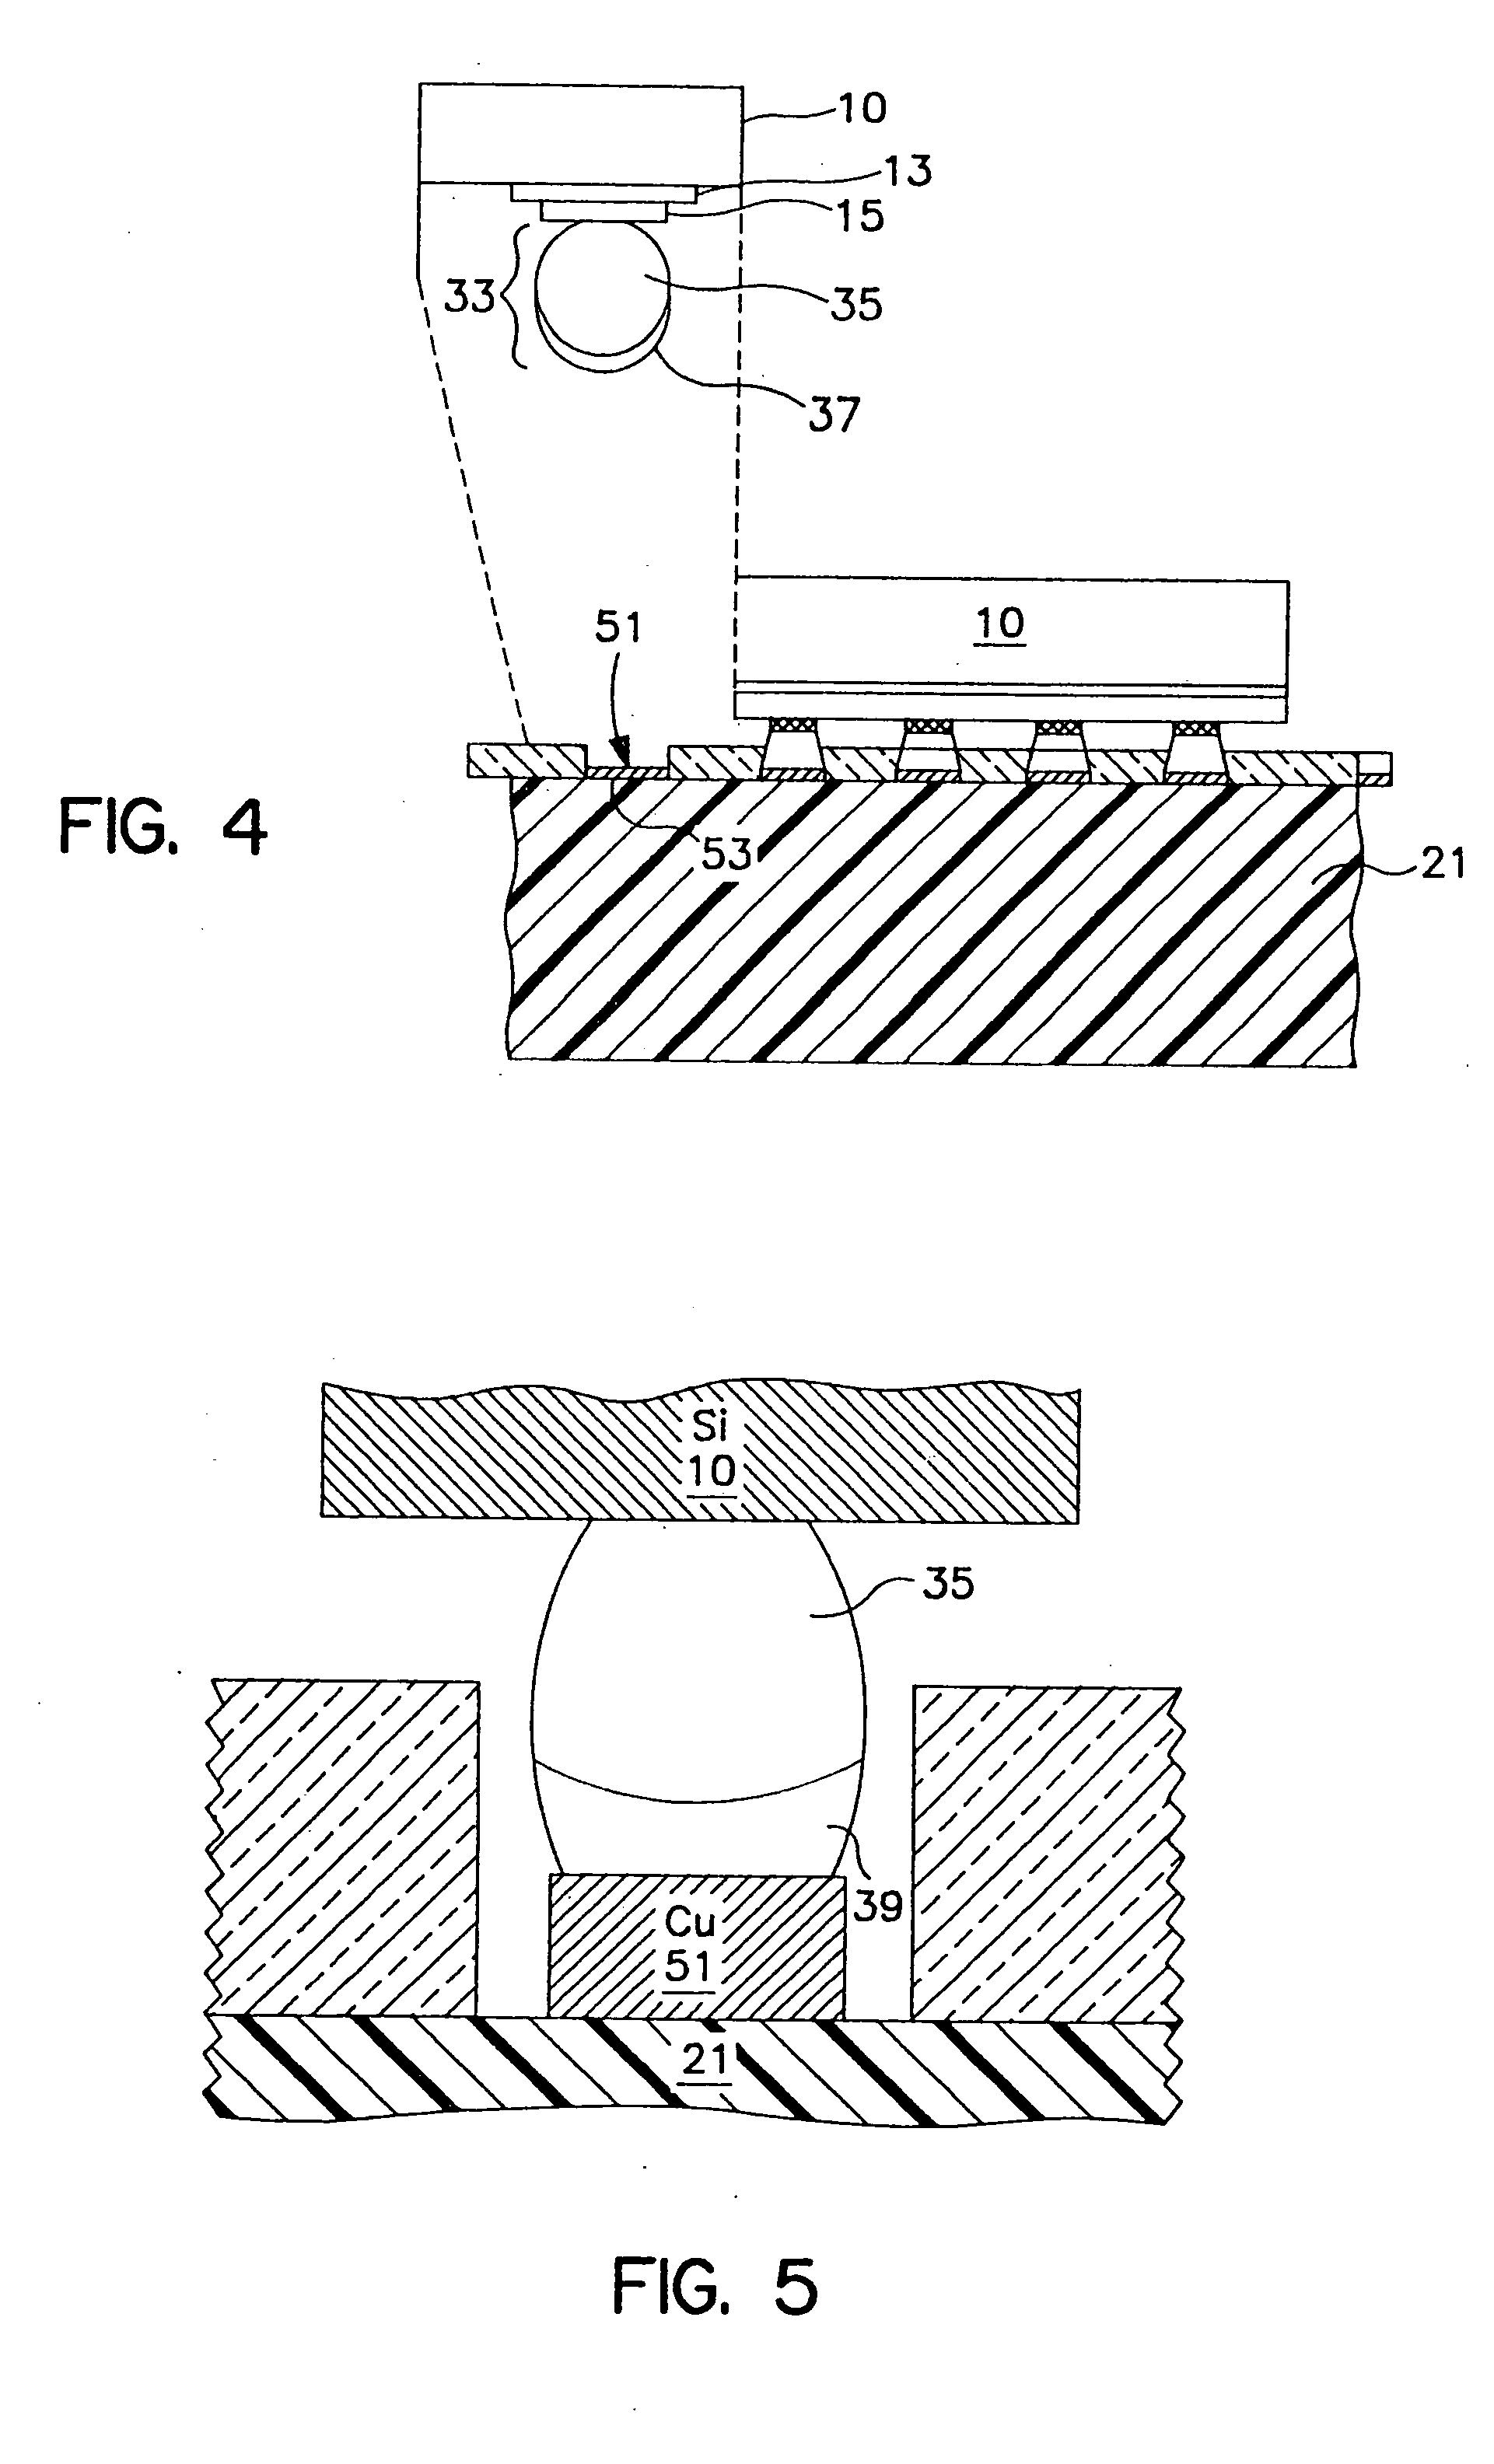 Low temperature solder chip attach structure and process to produce a high temperature interconnection